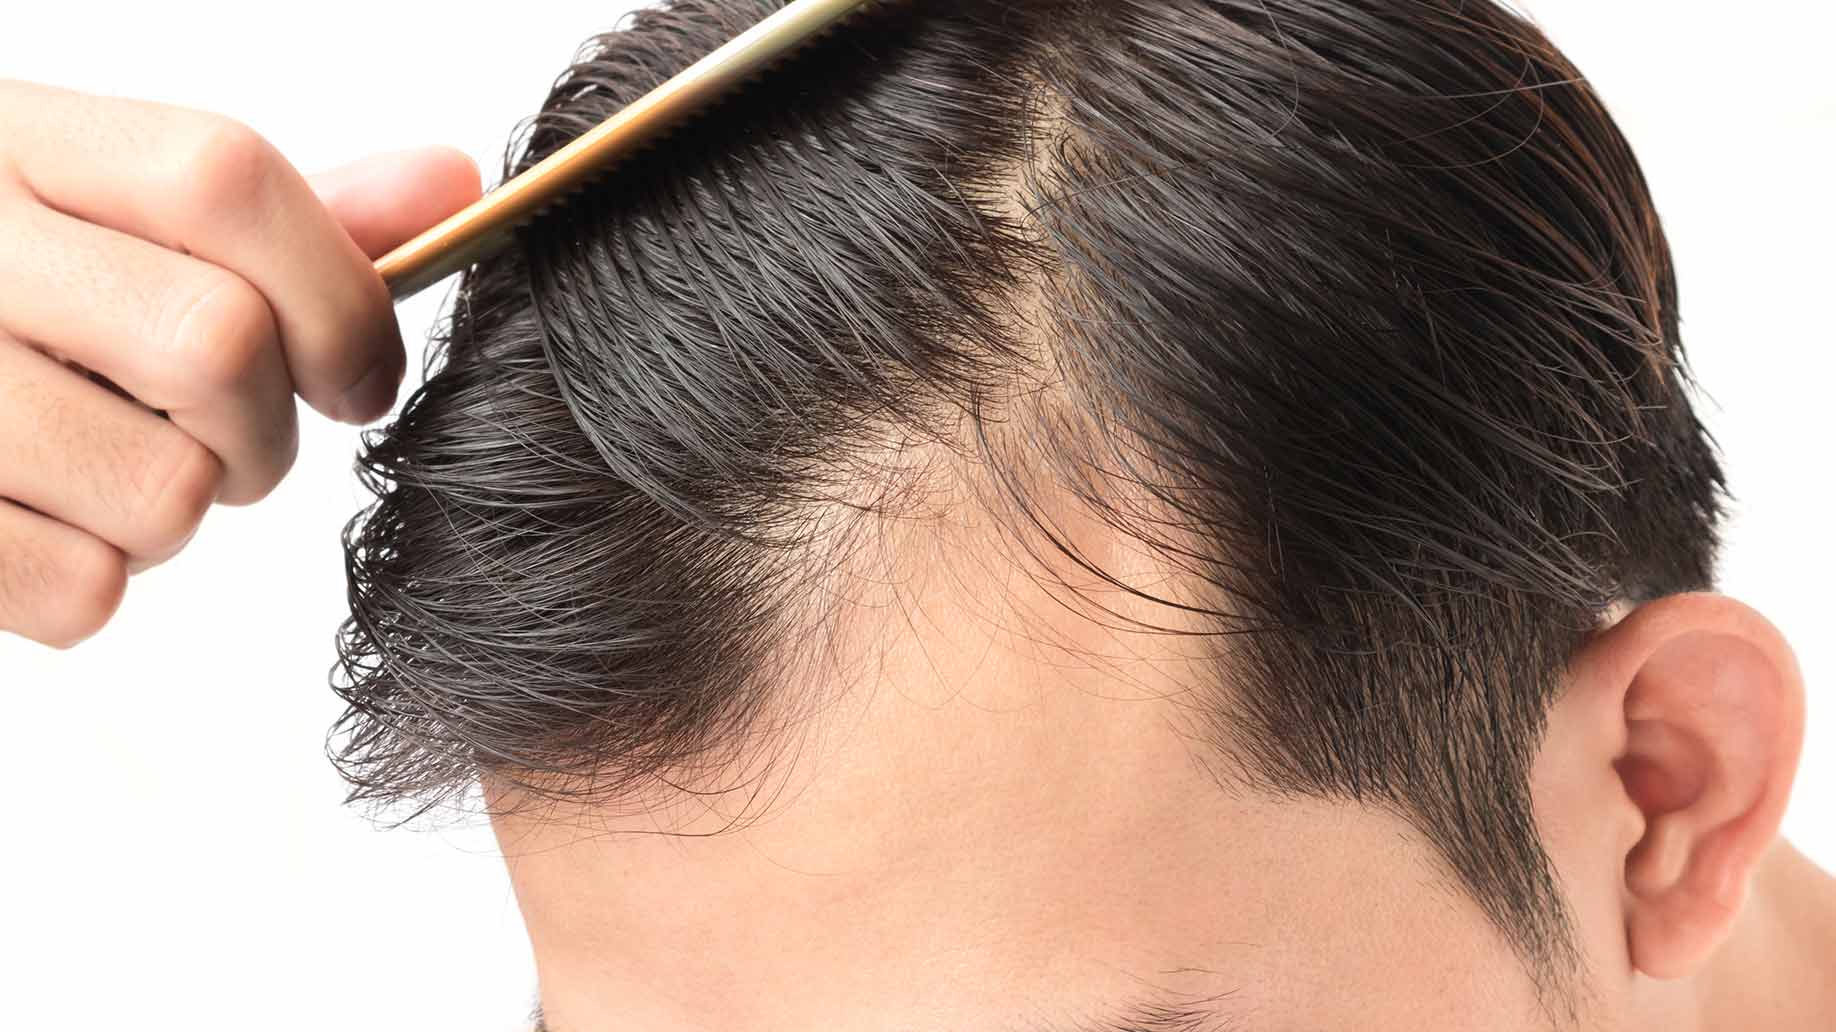 Hair Loss - Ways To Avoid Baldness Fast